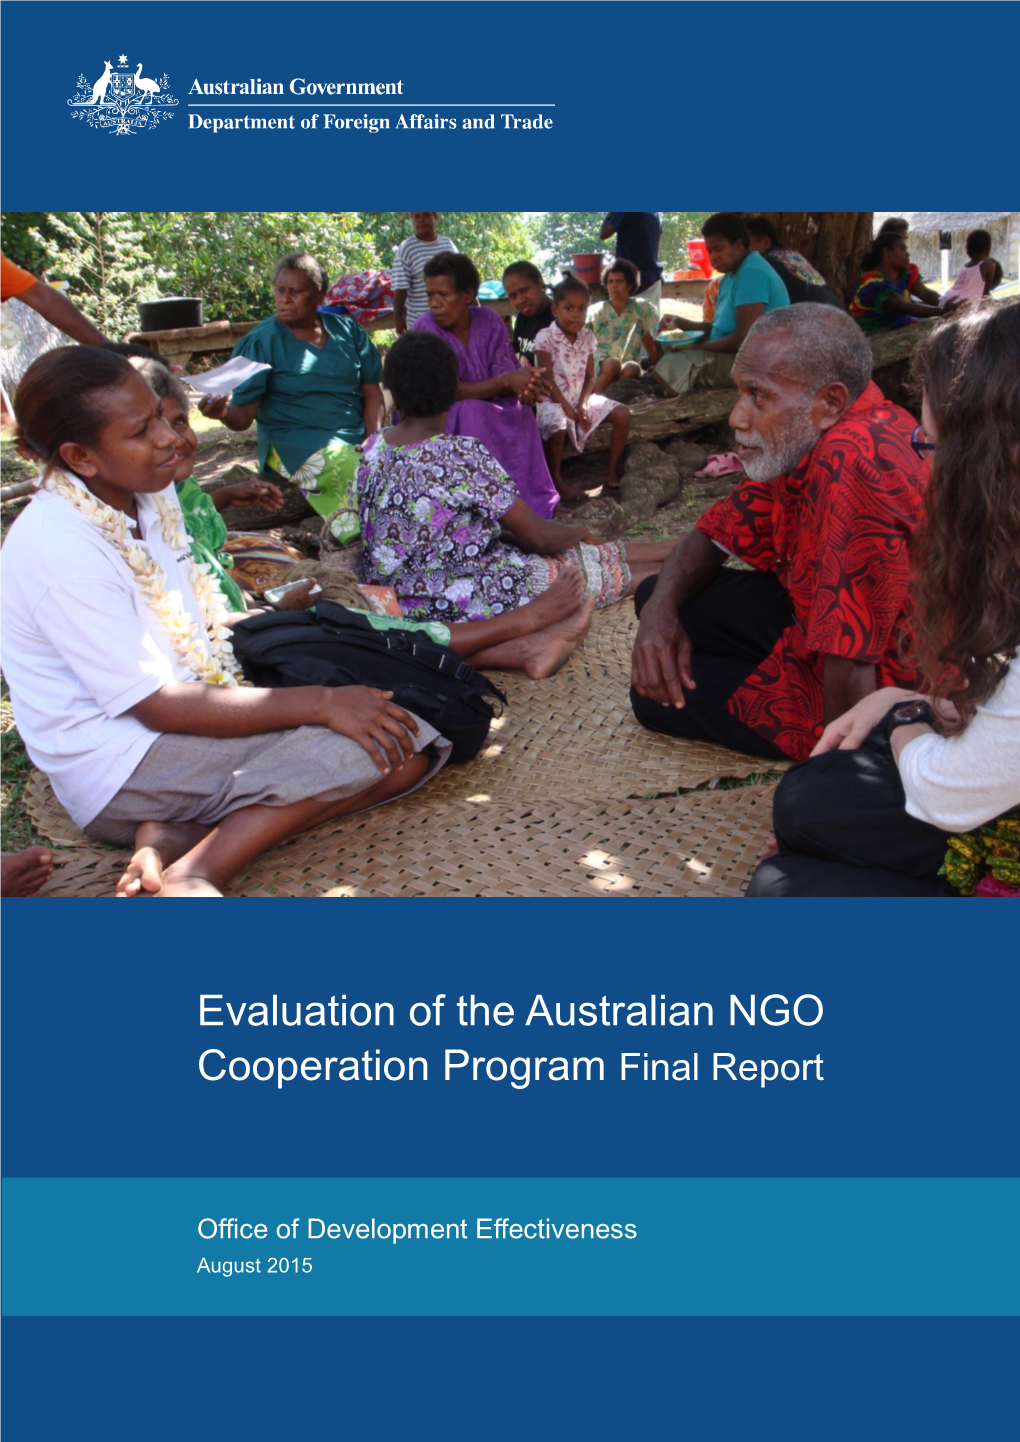 Evaluation of the Australian NGO Cooperation Program (ANCP) Was Added to Office of Development Effectiveness’S (ODE) Work Plan Three Years Ago